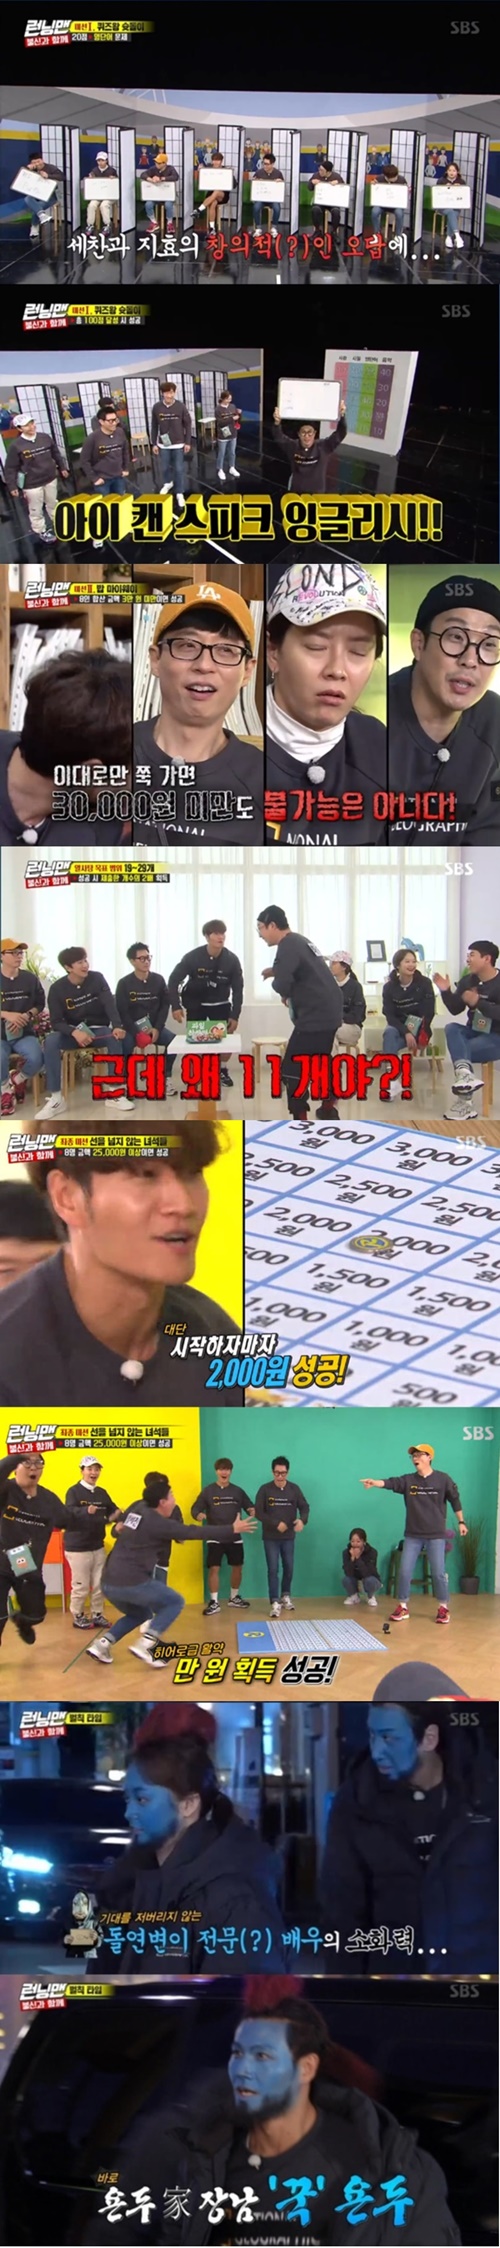 Running Man Jeon So-min and Lee Kwang-soo took the best minute.According to Nielsen Korea, a ratings agency on the 2nd, SBS Running Man, which was broadcast on the 1st, recorded 4.1% of the 2049 target audience rating (based on the metropolitan area).The broadcast was featured in a special unitary race With Disbelief, which was set up for members who had been in a lot of doubt and framing over the past few weeks.In the first mission, Quees King Shooter, all the answers were unanimously correct. All kinds of fouls and wrong answers from Jeon So-min came out, but all the correct answers came out.In the second mission, Bob My Way, Jeon So-min was prominent in his performance: one menu of the eight different menus was chosen privately, and if the sum was less than 30,000 won, it was a full-time pass-through mission.While Ji Suk-jin chose a high-priced soy sauce, Jeon So-min chose boiled eggs and all the members ate well.On the other hand, the third mission, Answer the category, which is successful when all the people say the category in 8 seconds, failed, and the distrust of the members once again raised their heads and laughed.Fortunately, in the final mission The Guys who do not cross the line, Yang Se-chan won the 10,000 won in his performance and gave a warm heart.Yang Se-chan won the first pRace in the rankings by members and won the penalty exemption, and the penalty was confirmed as Jeon So-min and Lee Kwang-soo became 7th and 8th.The Penalists Jeon So-min and Lee Kwang-soo had to sell the buns on the street with the Running Man mega-hit makeup Yondu, and pointed out Kim Jong-guk as additional penalties.